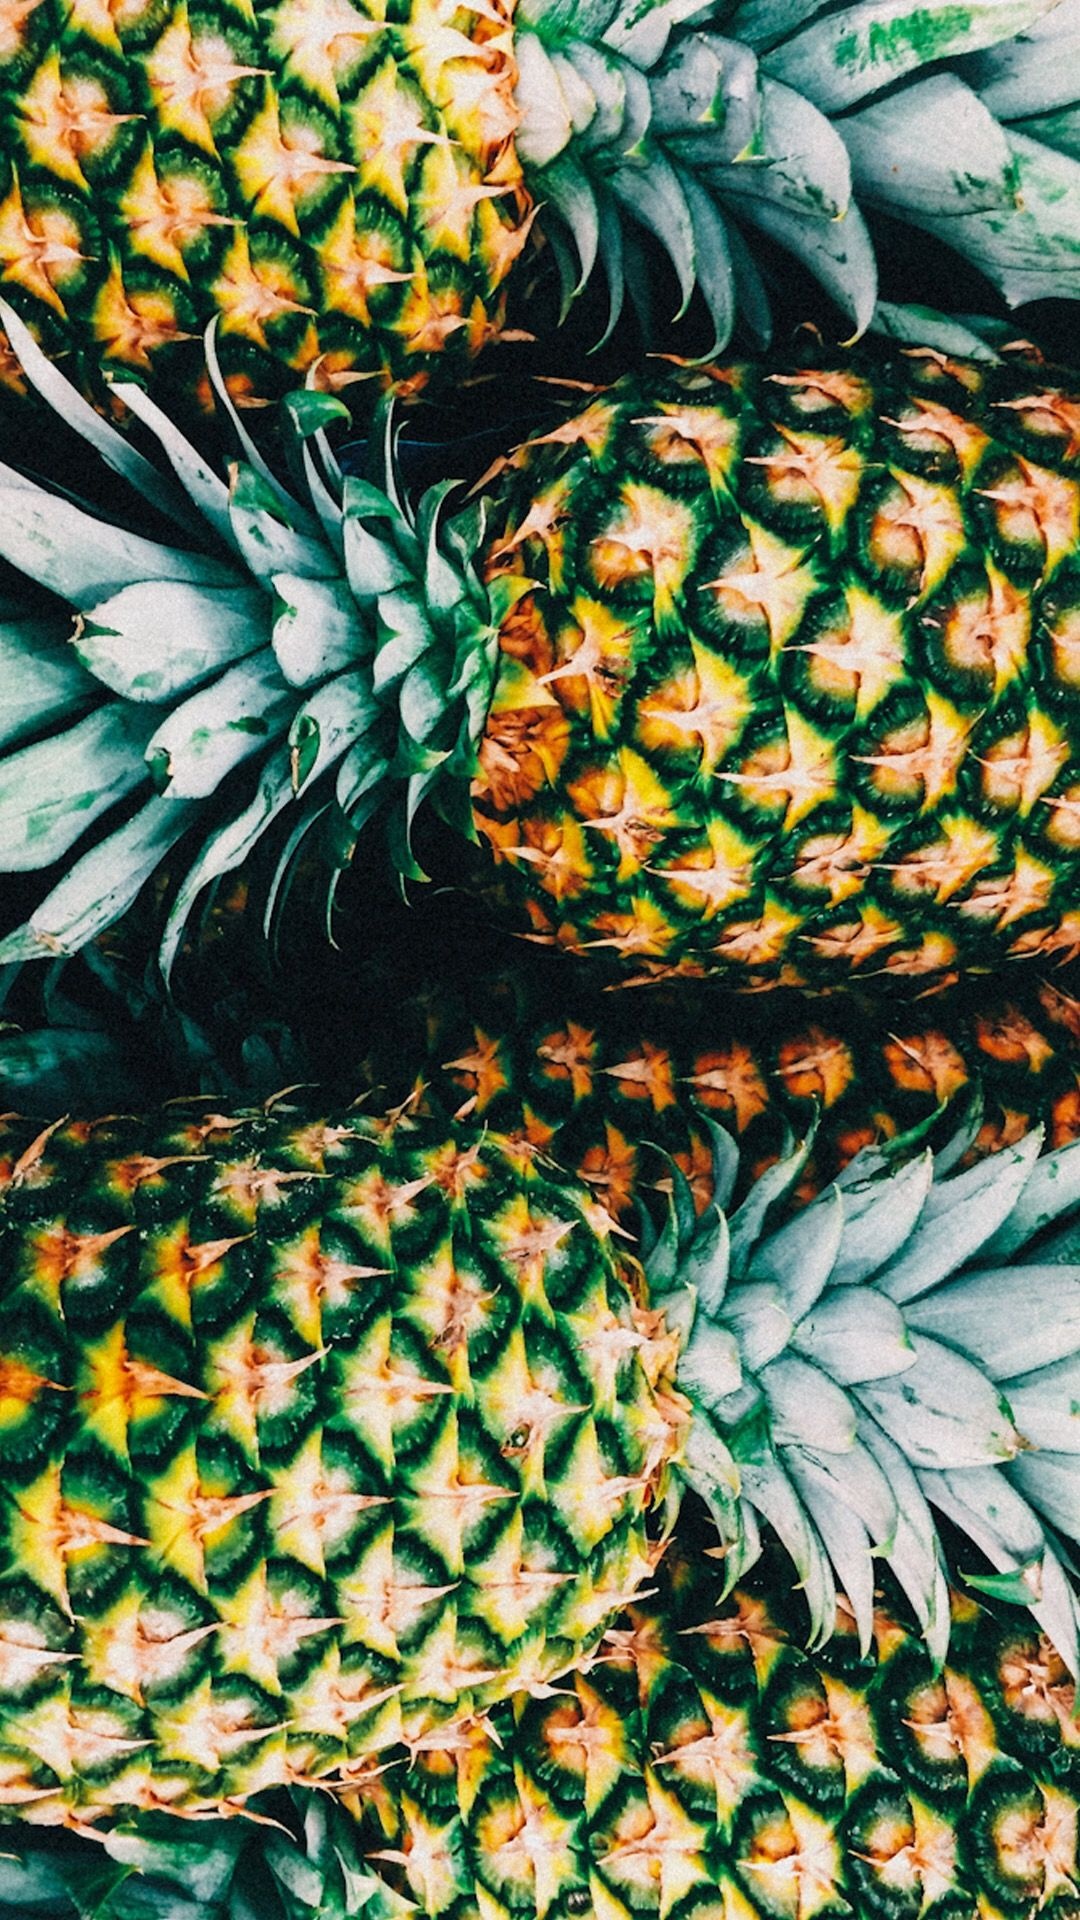 Pineapple: The only edible fruit of its kind, the Bromeliads. 1080x1920 Full HD Wallpaper.